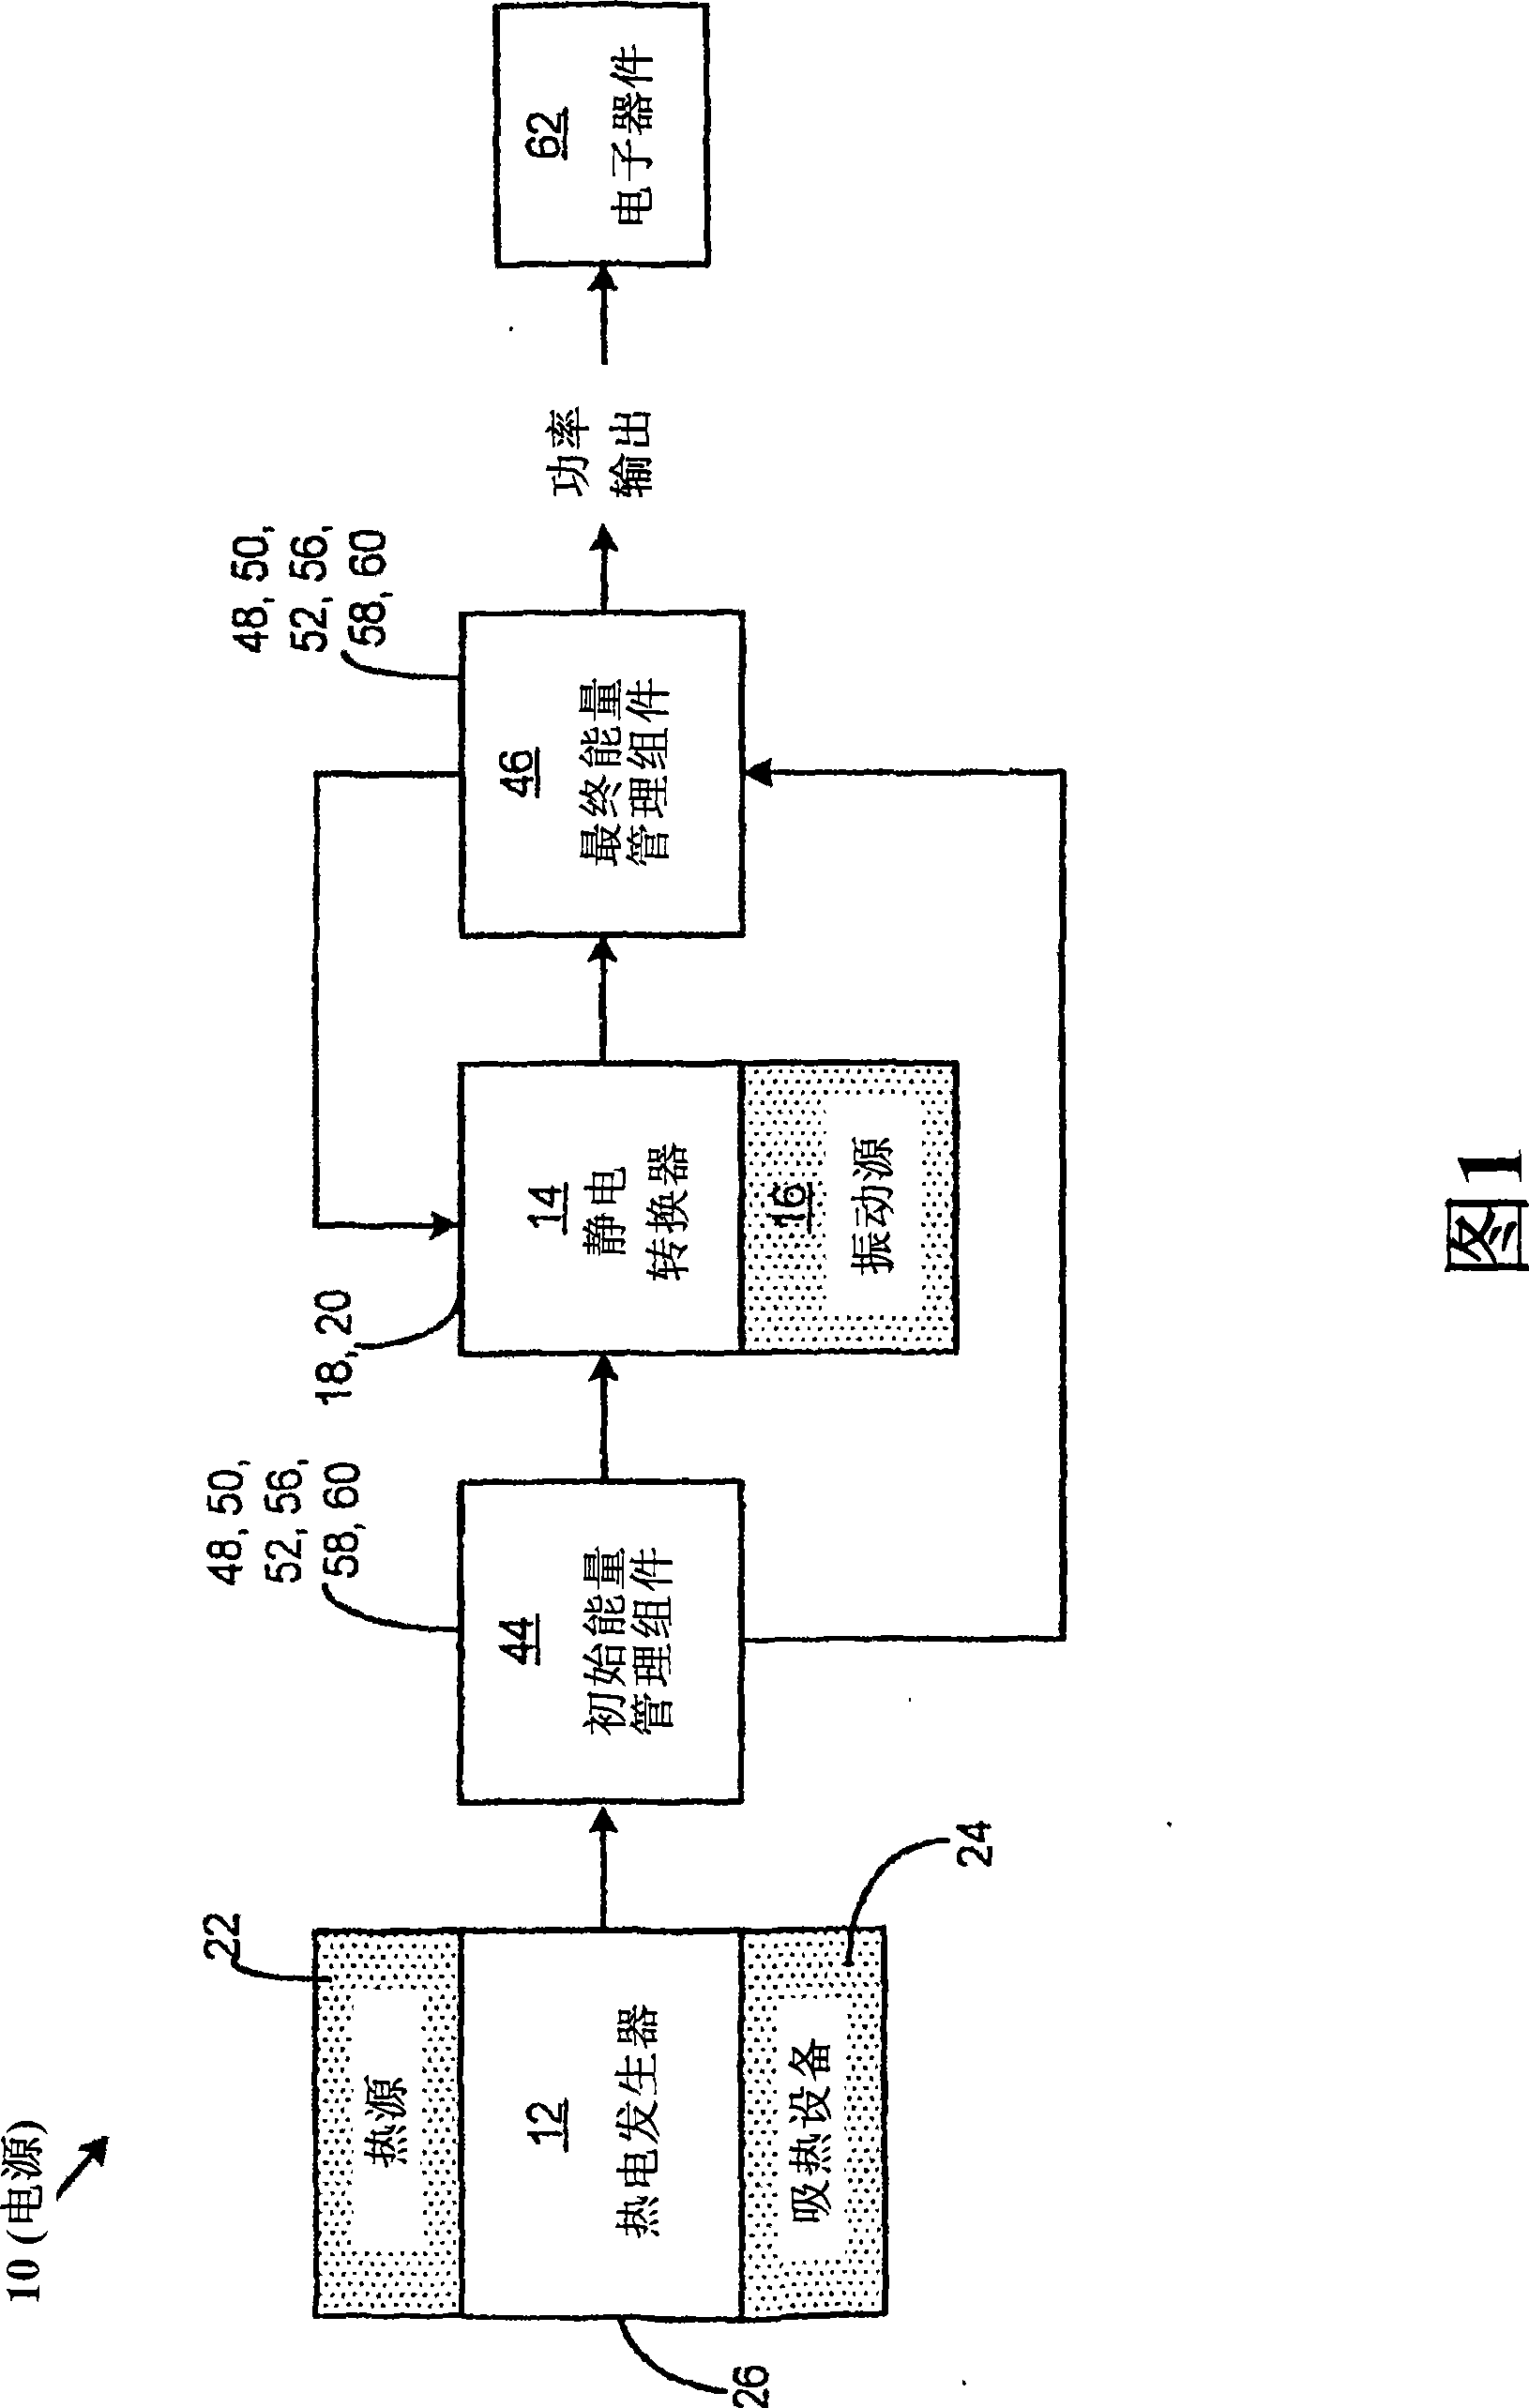 Thermoelectric generator with micro-electrostatic energy converter